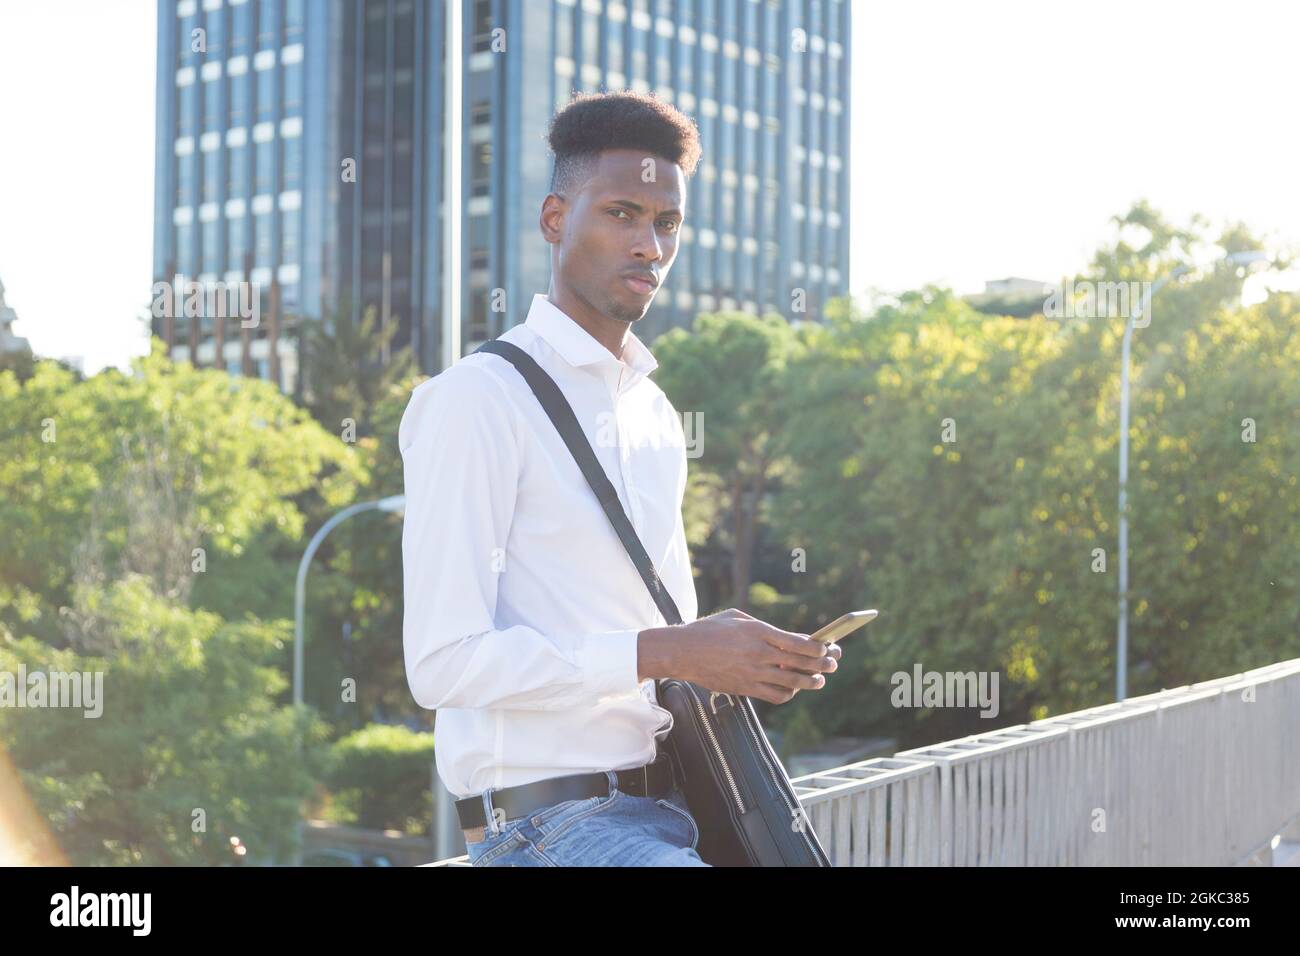 young afroamerican businessman with briefcase using phone outdoor Stock Photo